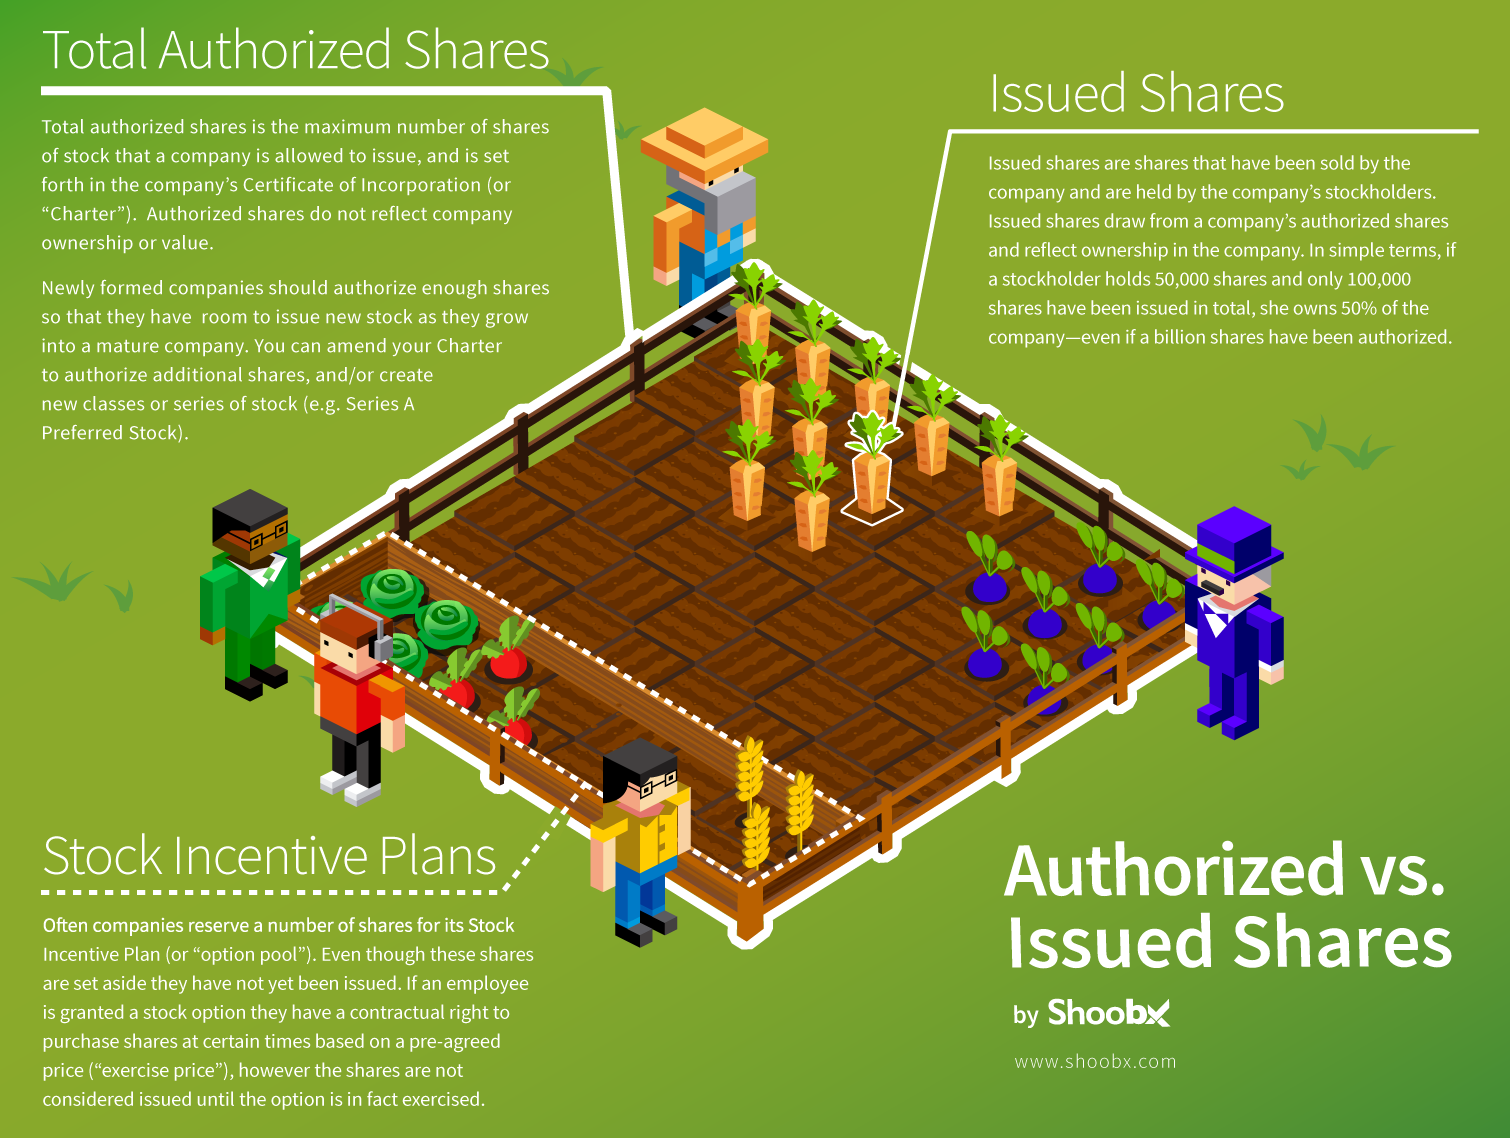 shoobx-authorized-issued-infographic